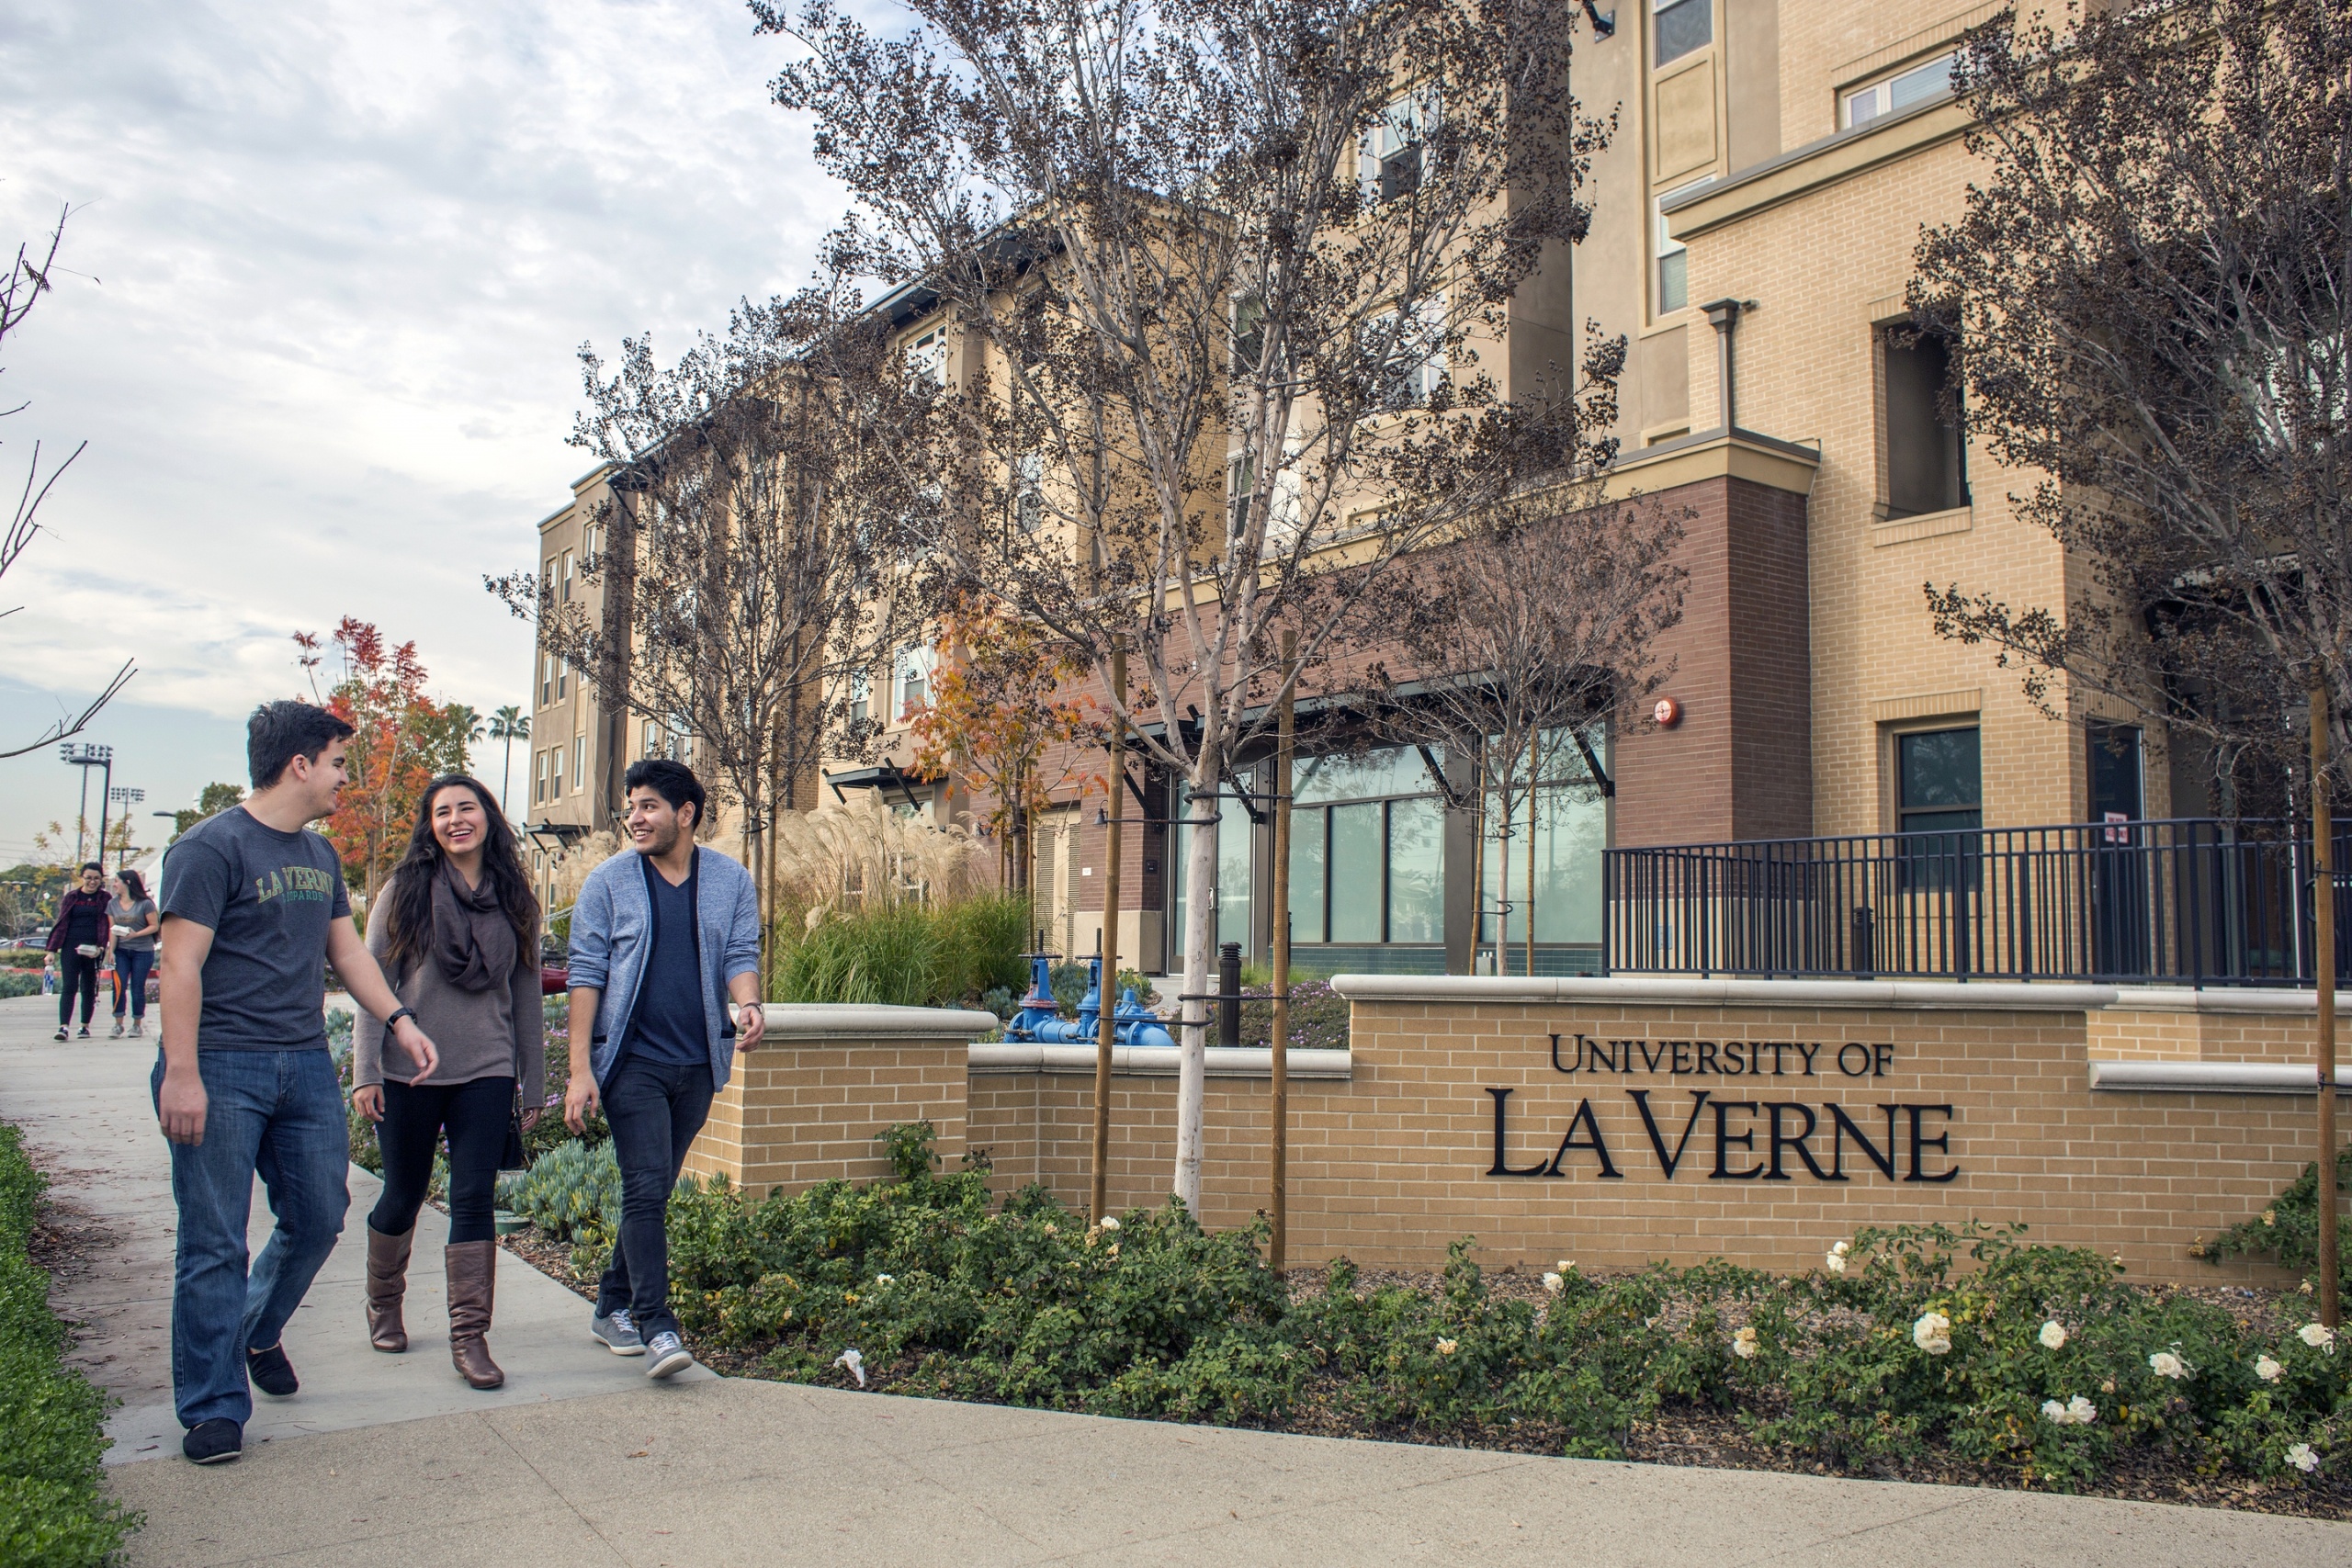 No Tuition Raise for Most University of La Verne Programs in 202122